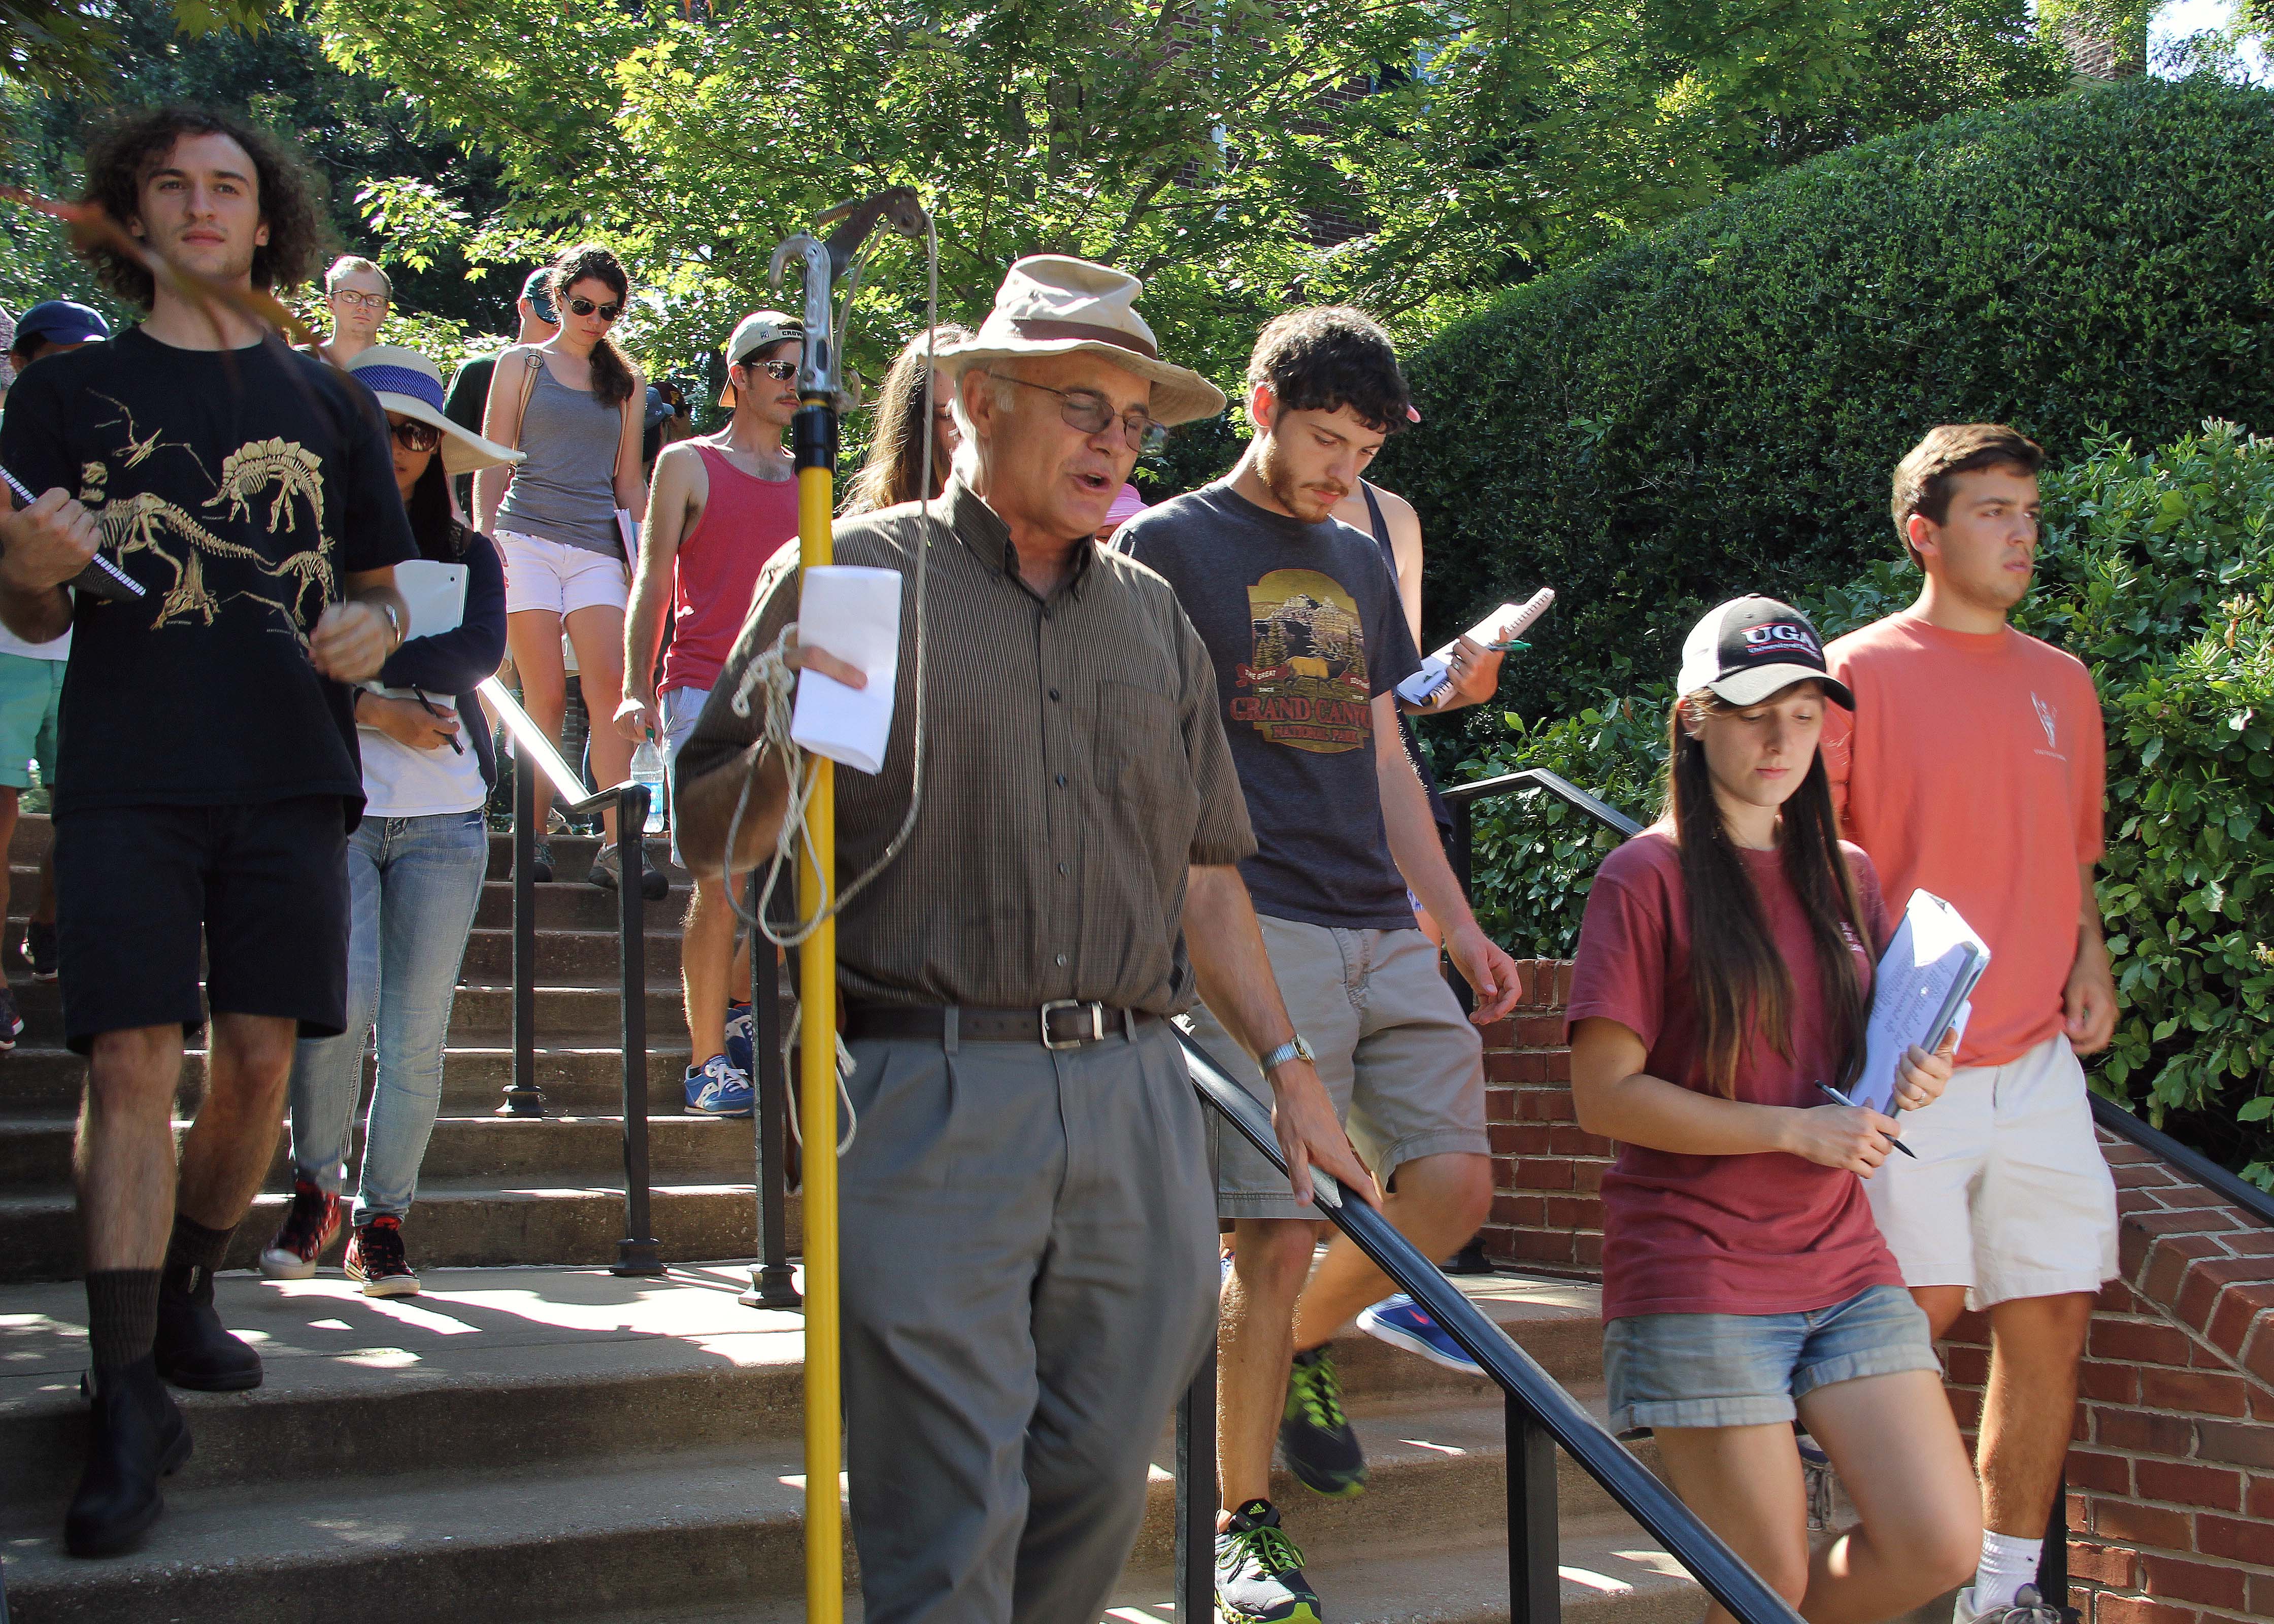 CAES horticulture professor Tim Smalley leads his students on a walking plant ID tour on the UGA campus in Athens, Ga.